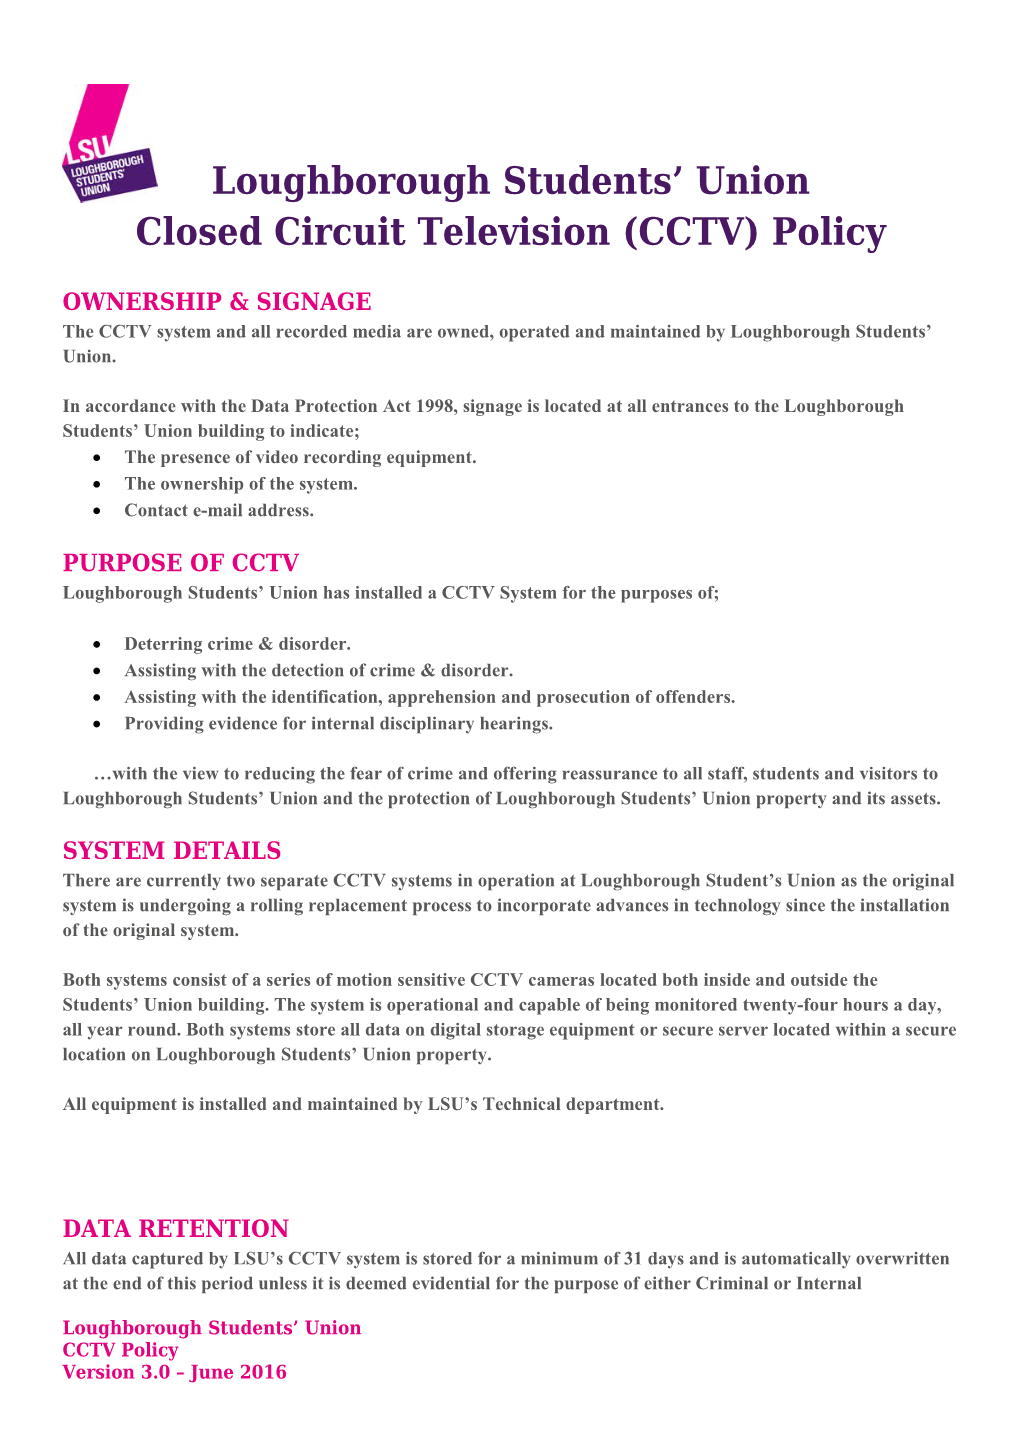 Closed Circuit Television (CCTV) Policy